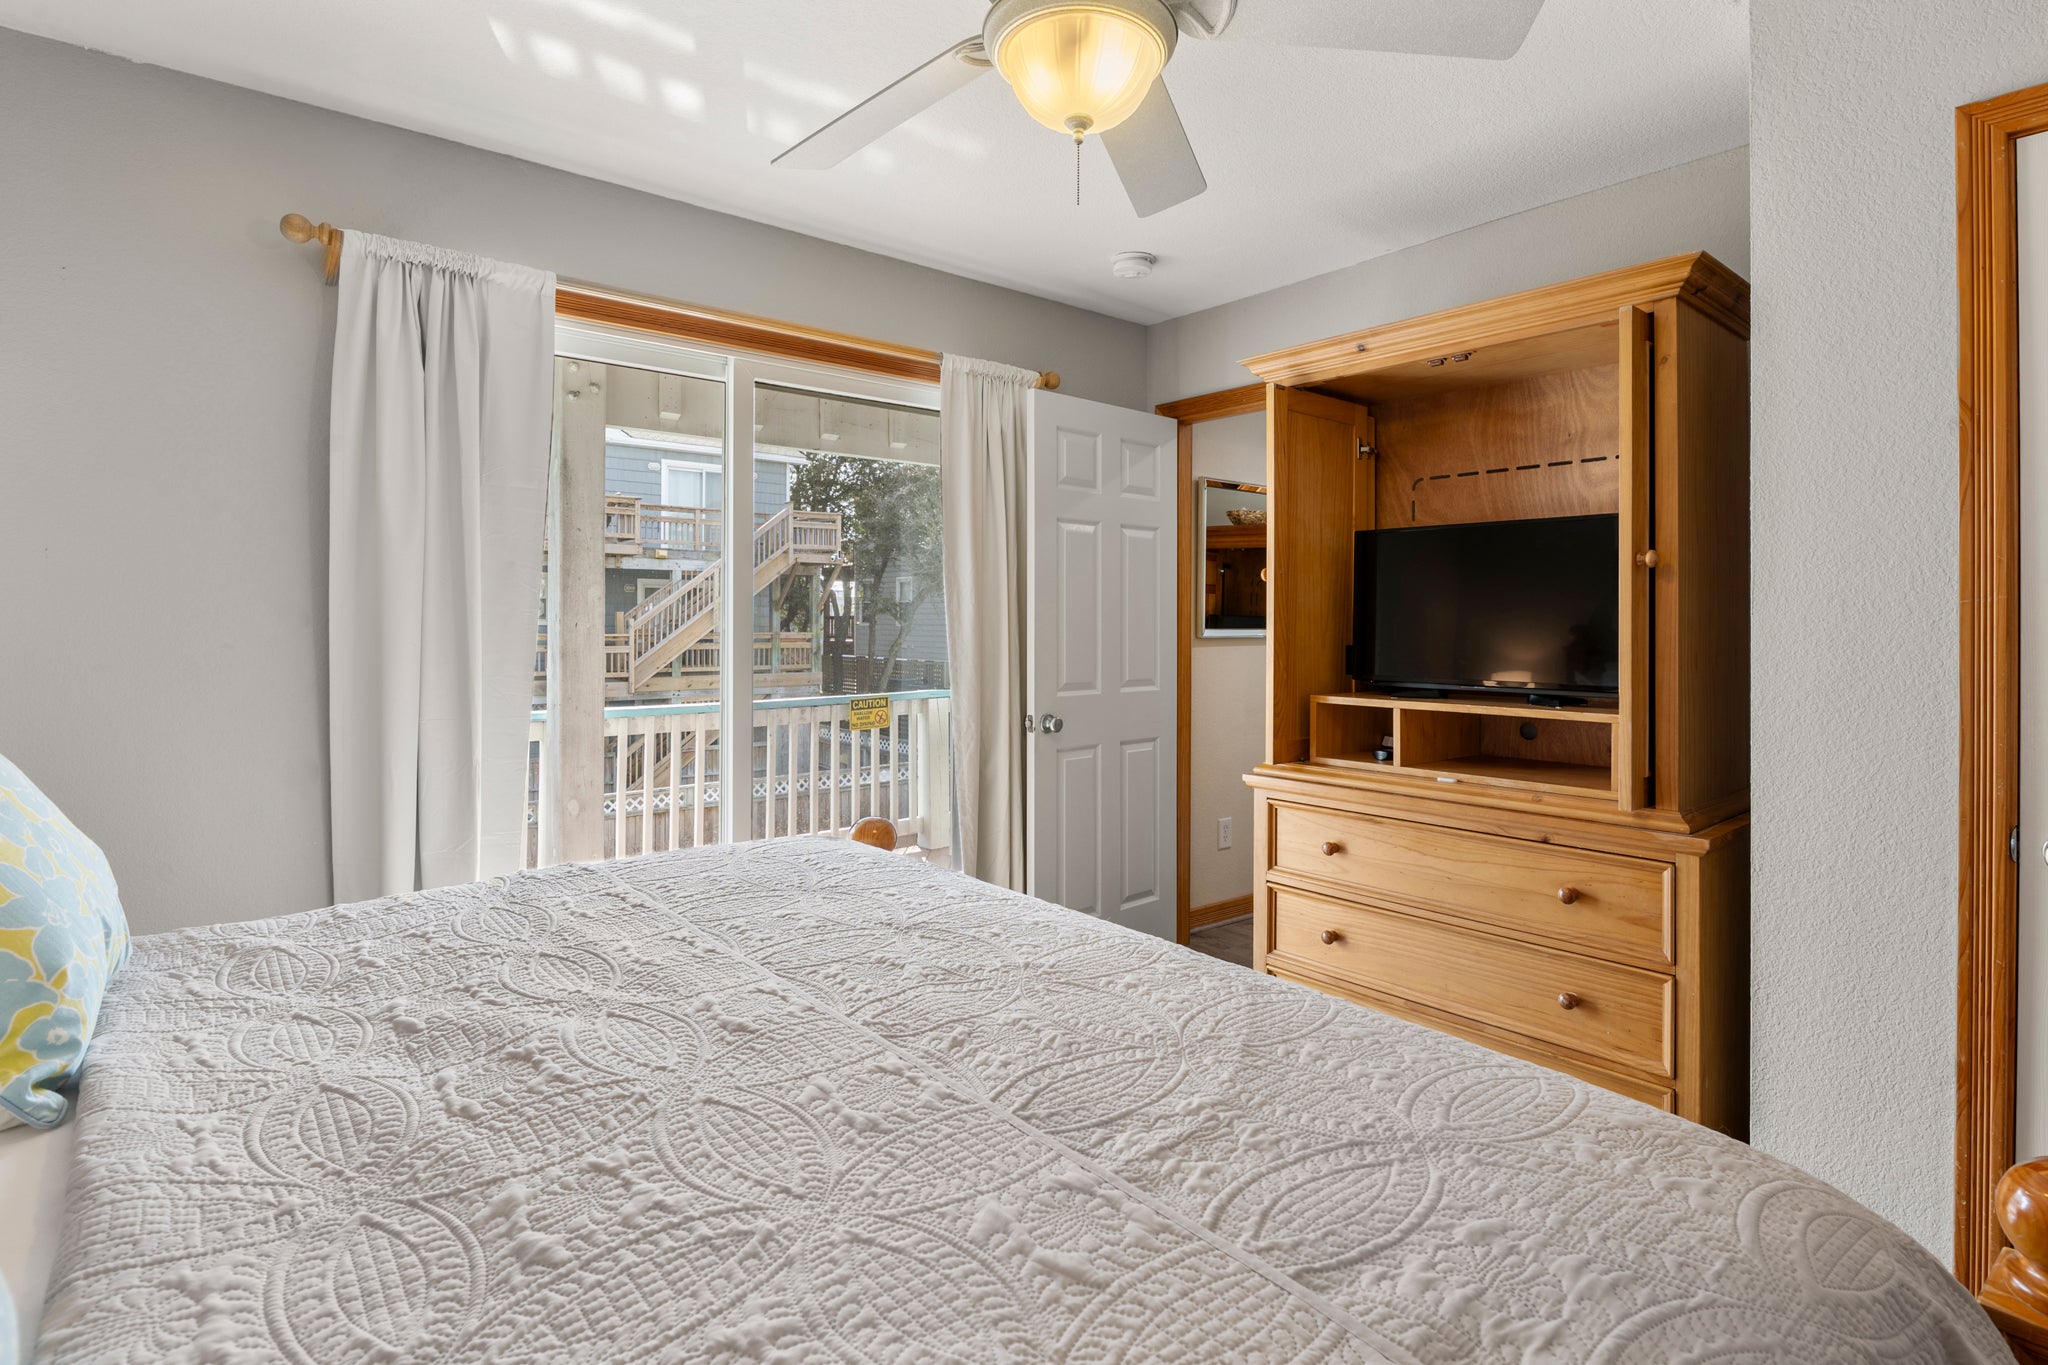 OSO101: Joshua's Place | Mid Level Bedroom 6